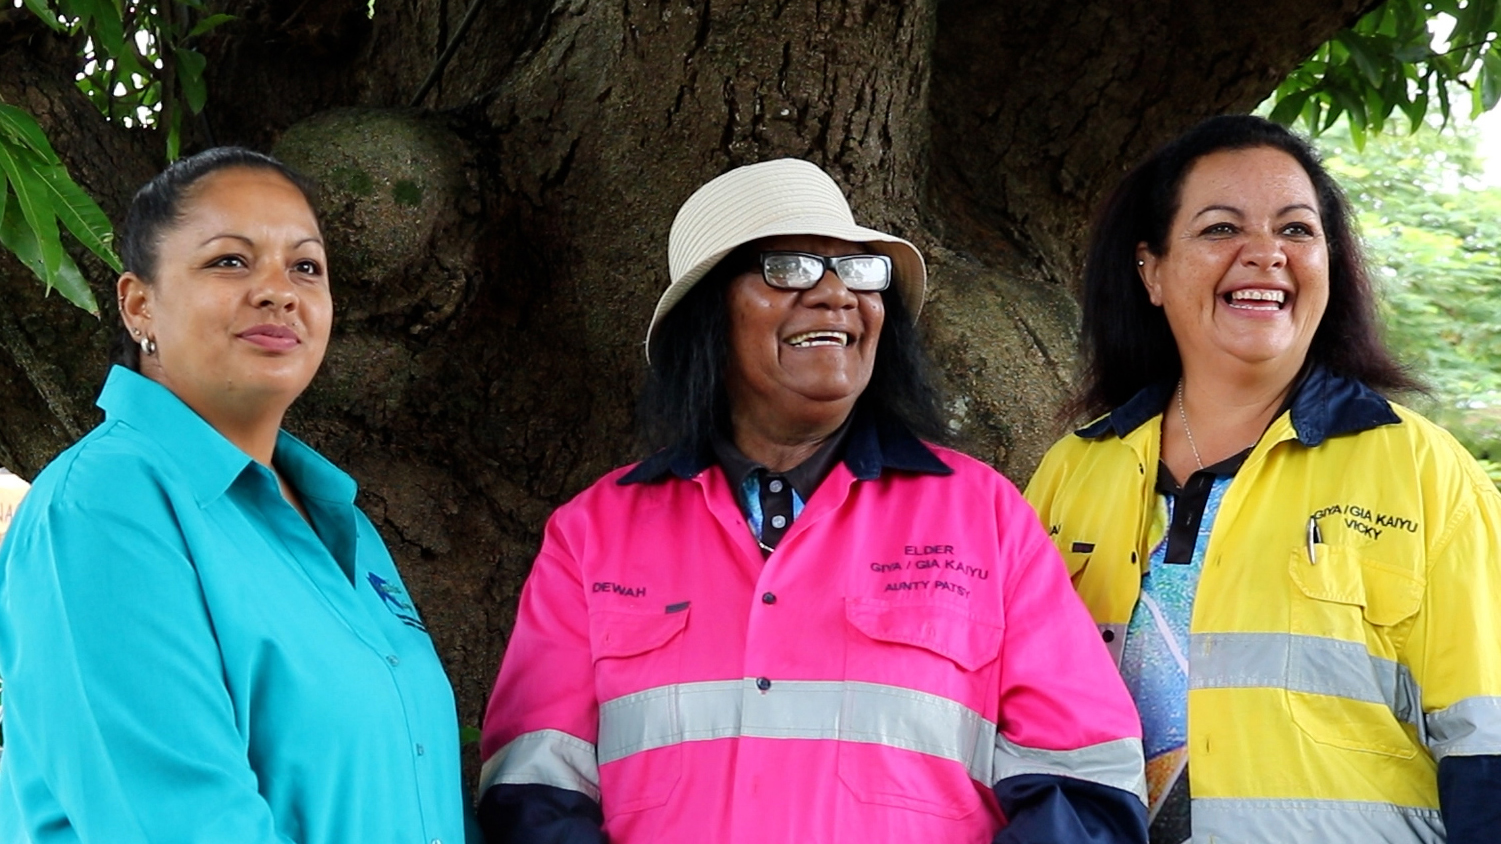 3 women in bright clothing in front of a tree